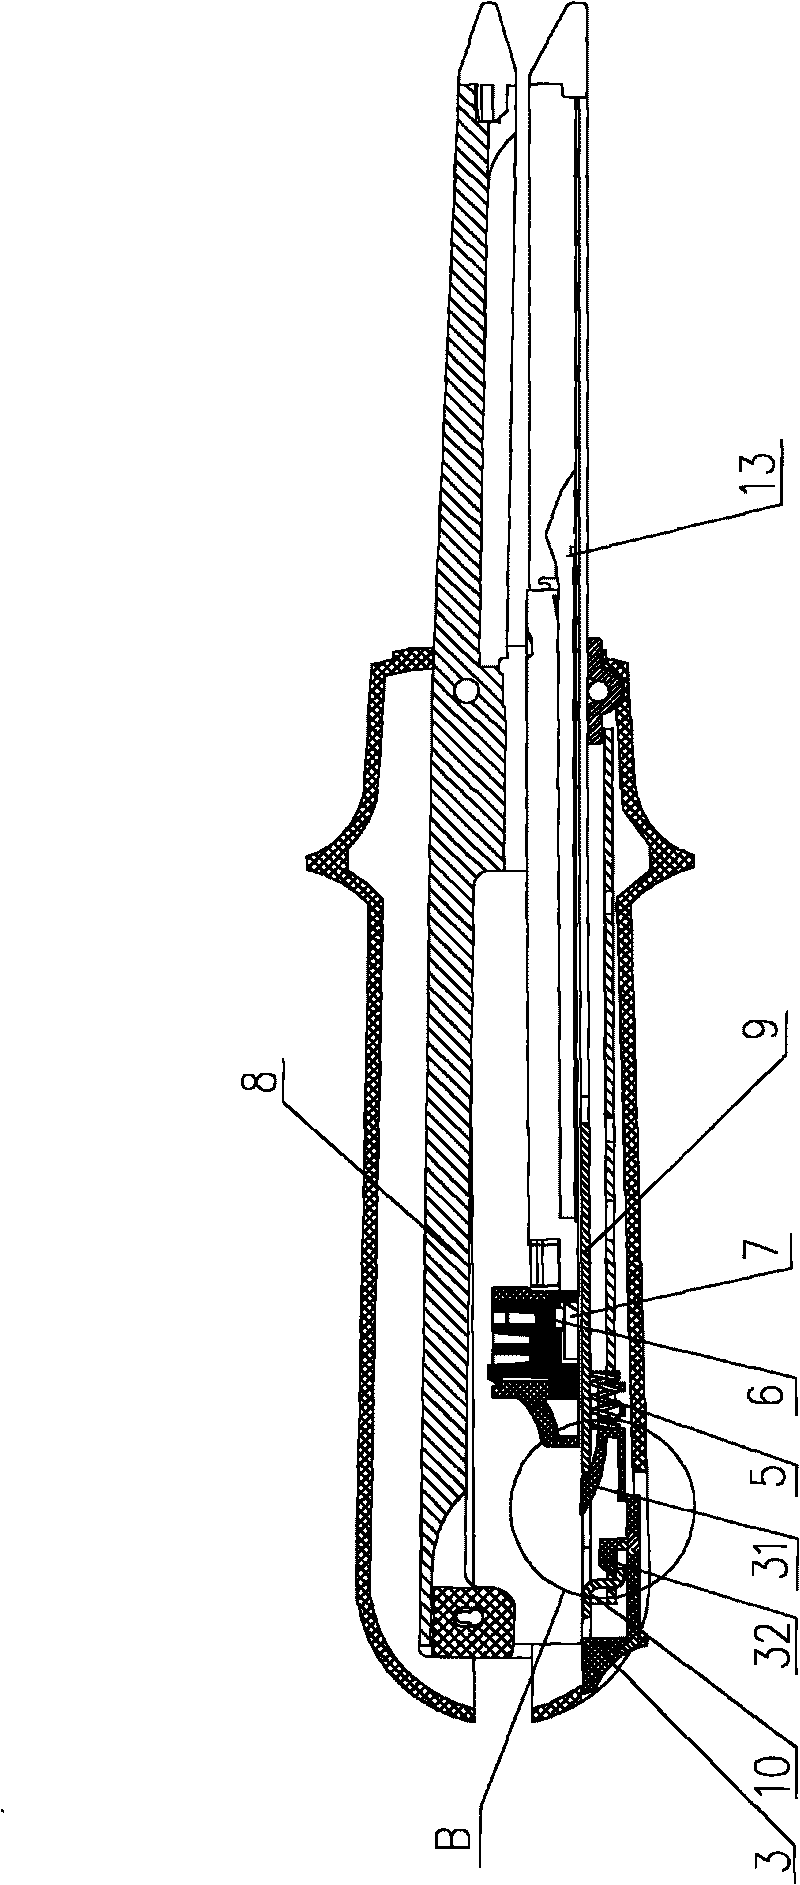 Surgical cutting and binding apparatus